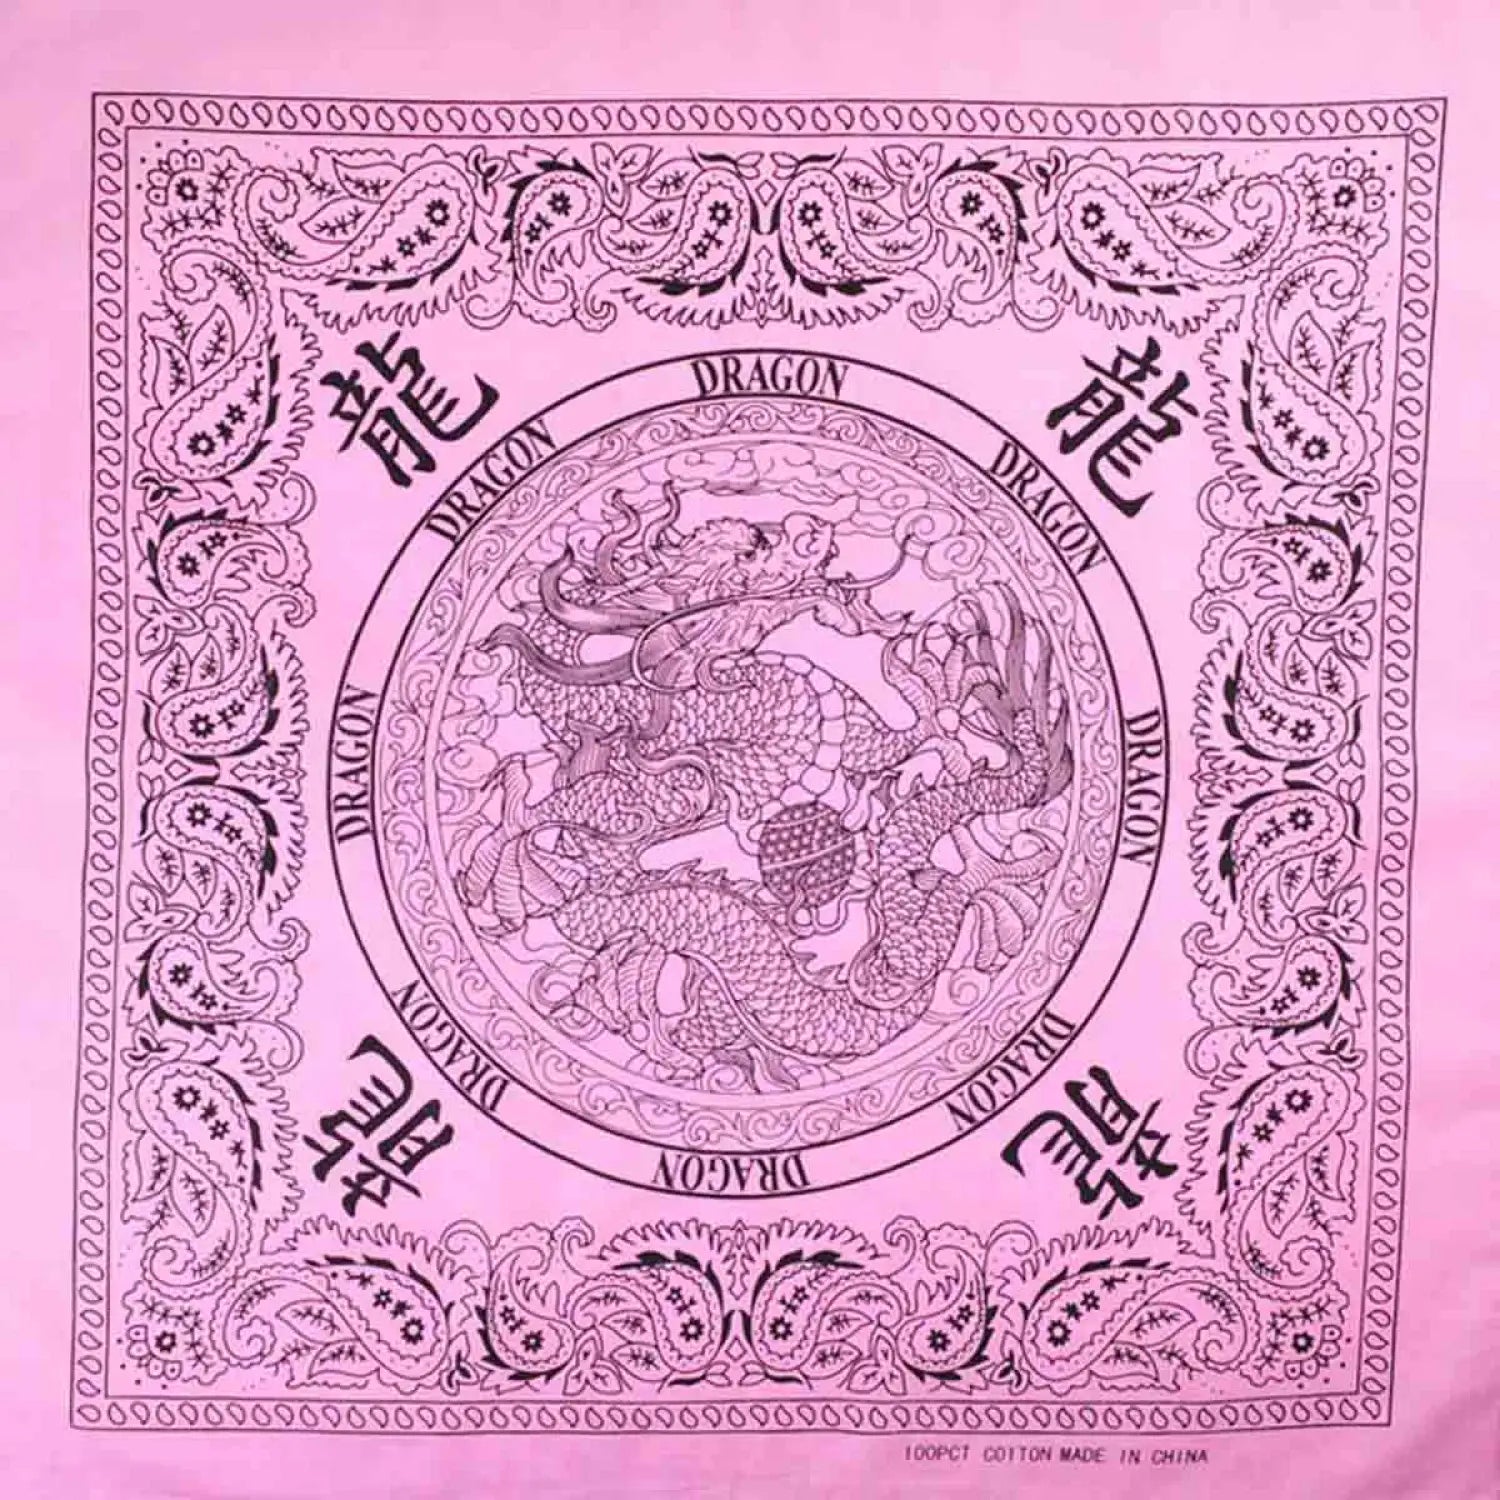 Dragon & Paisley Print Square Bandana in 100% Cotton featuring a woman in a floral pattern